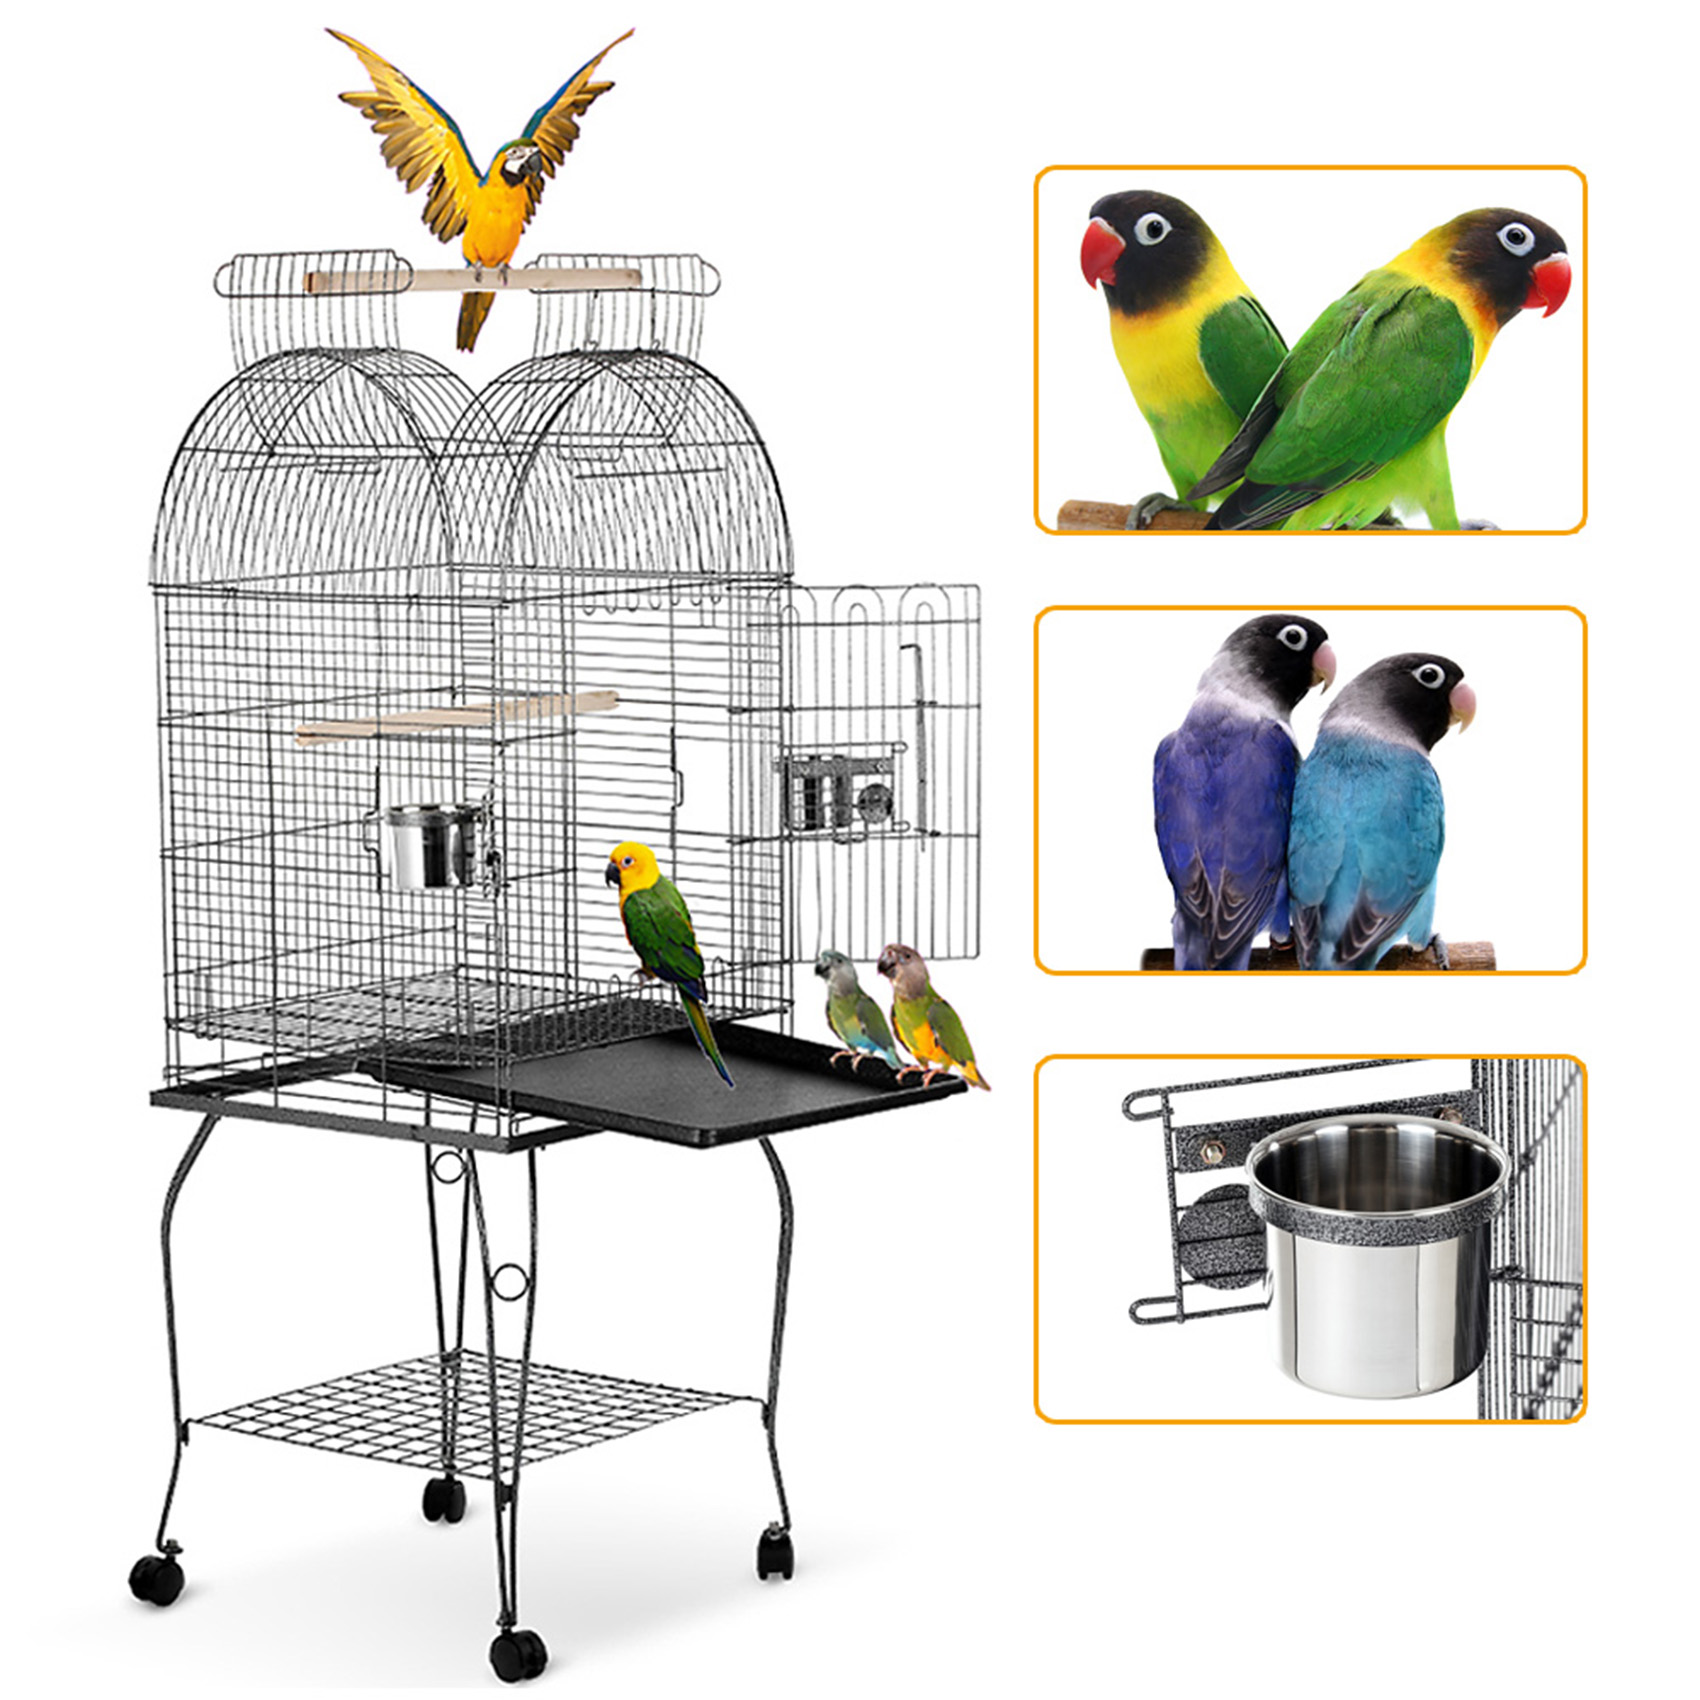 iKayaa Wrounght Iron Bird Parrot Cage Play Top Macaw Cockatoo Parakeet Conure Finch Cage + Stainless Steel Bowl Lockable Wheels